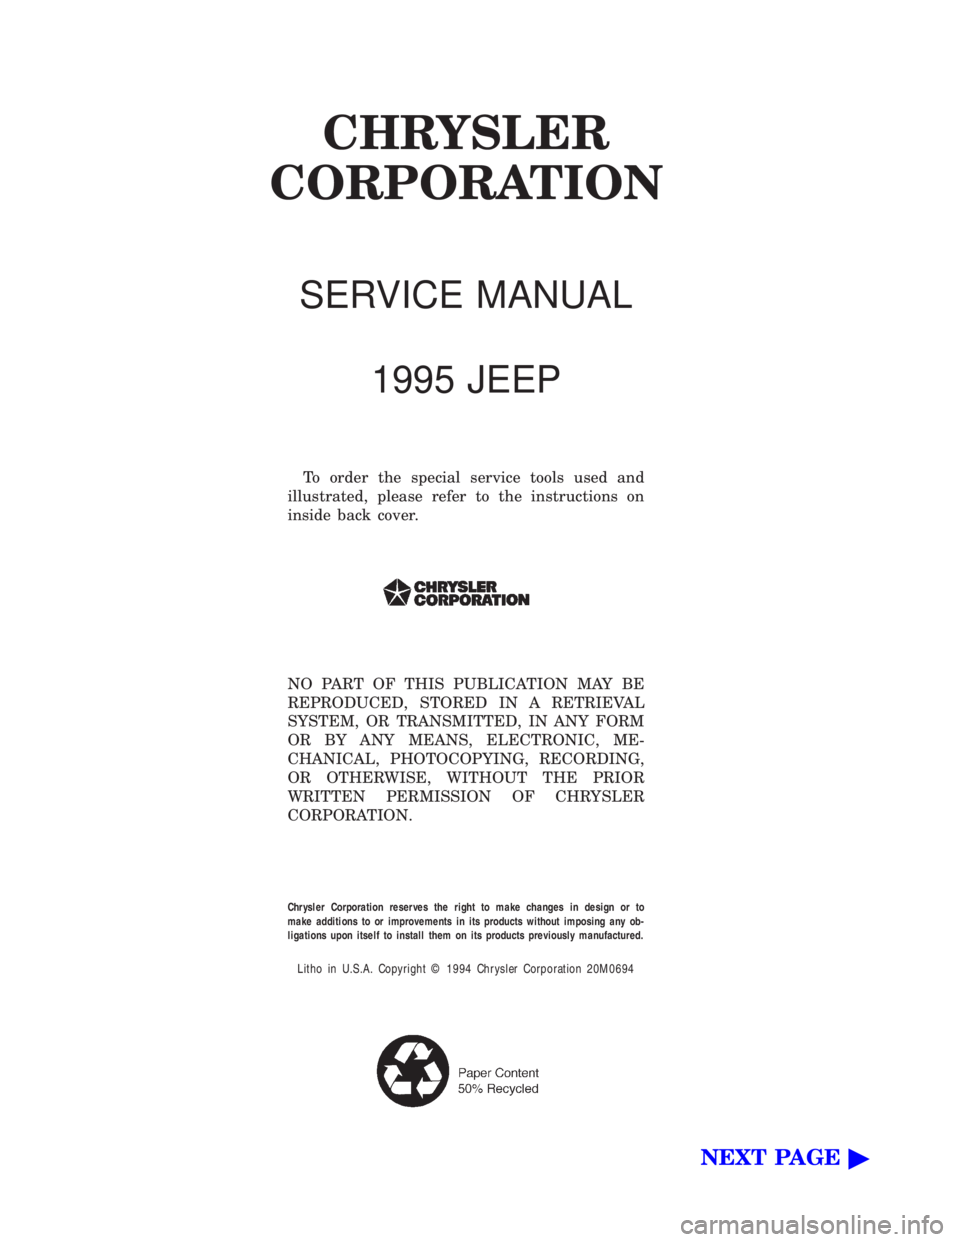 JEEP YJ 1995  Service And Repair Manual CHRYSLER
CORPORATION
SERVICE MANUAL
1995 JEEP
To order the special service tools used and
illustrated, please refer to the instructions on
inside back cover.
NO PART OF THIS PUBLICATION MAY BE
REPRODU